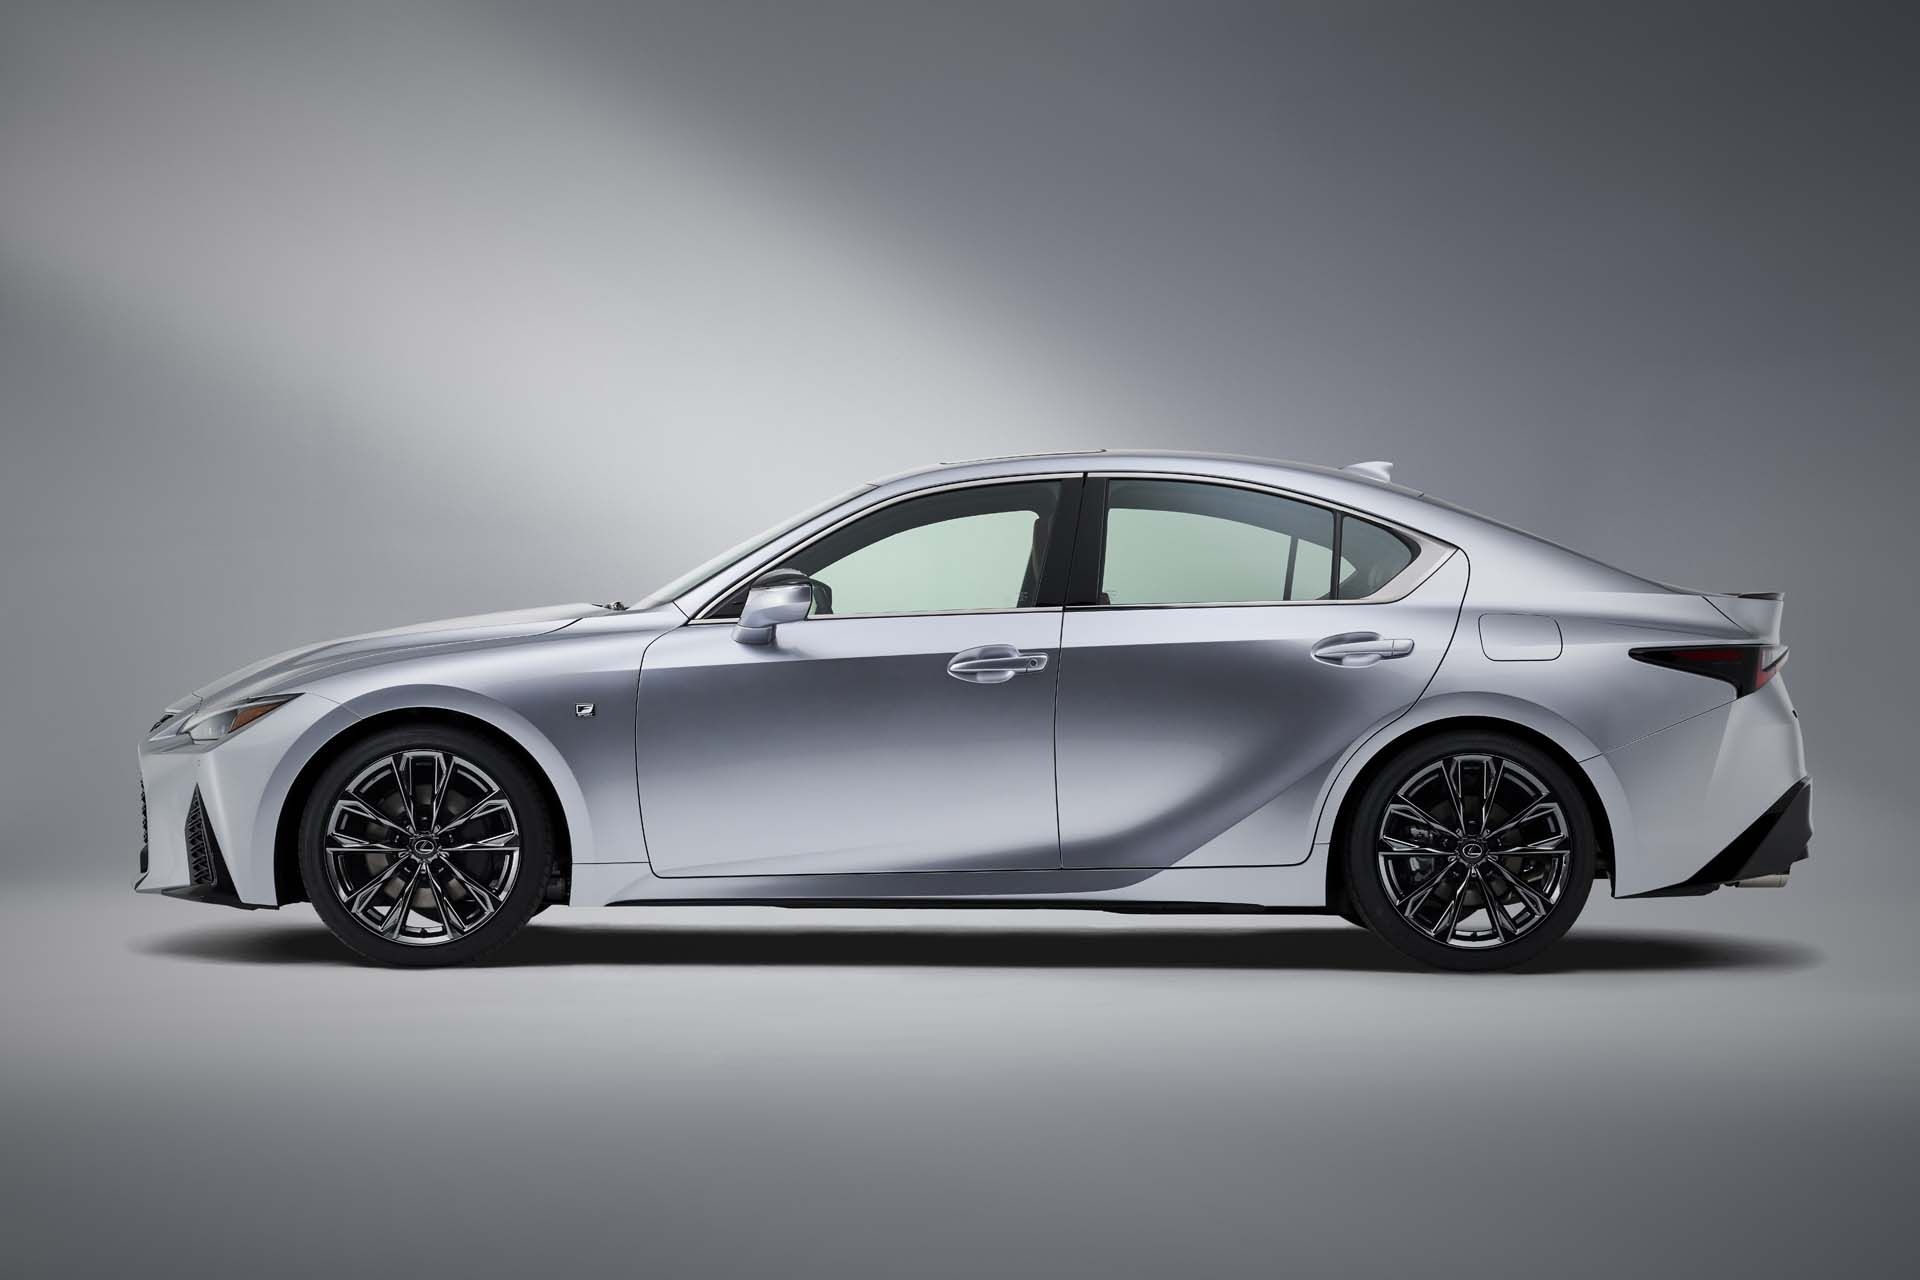 Lexus IS, 2021 edition, Sporty and sleek, Advanced safety features, 1920x1280 HD Desktop